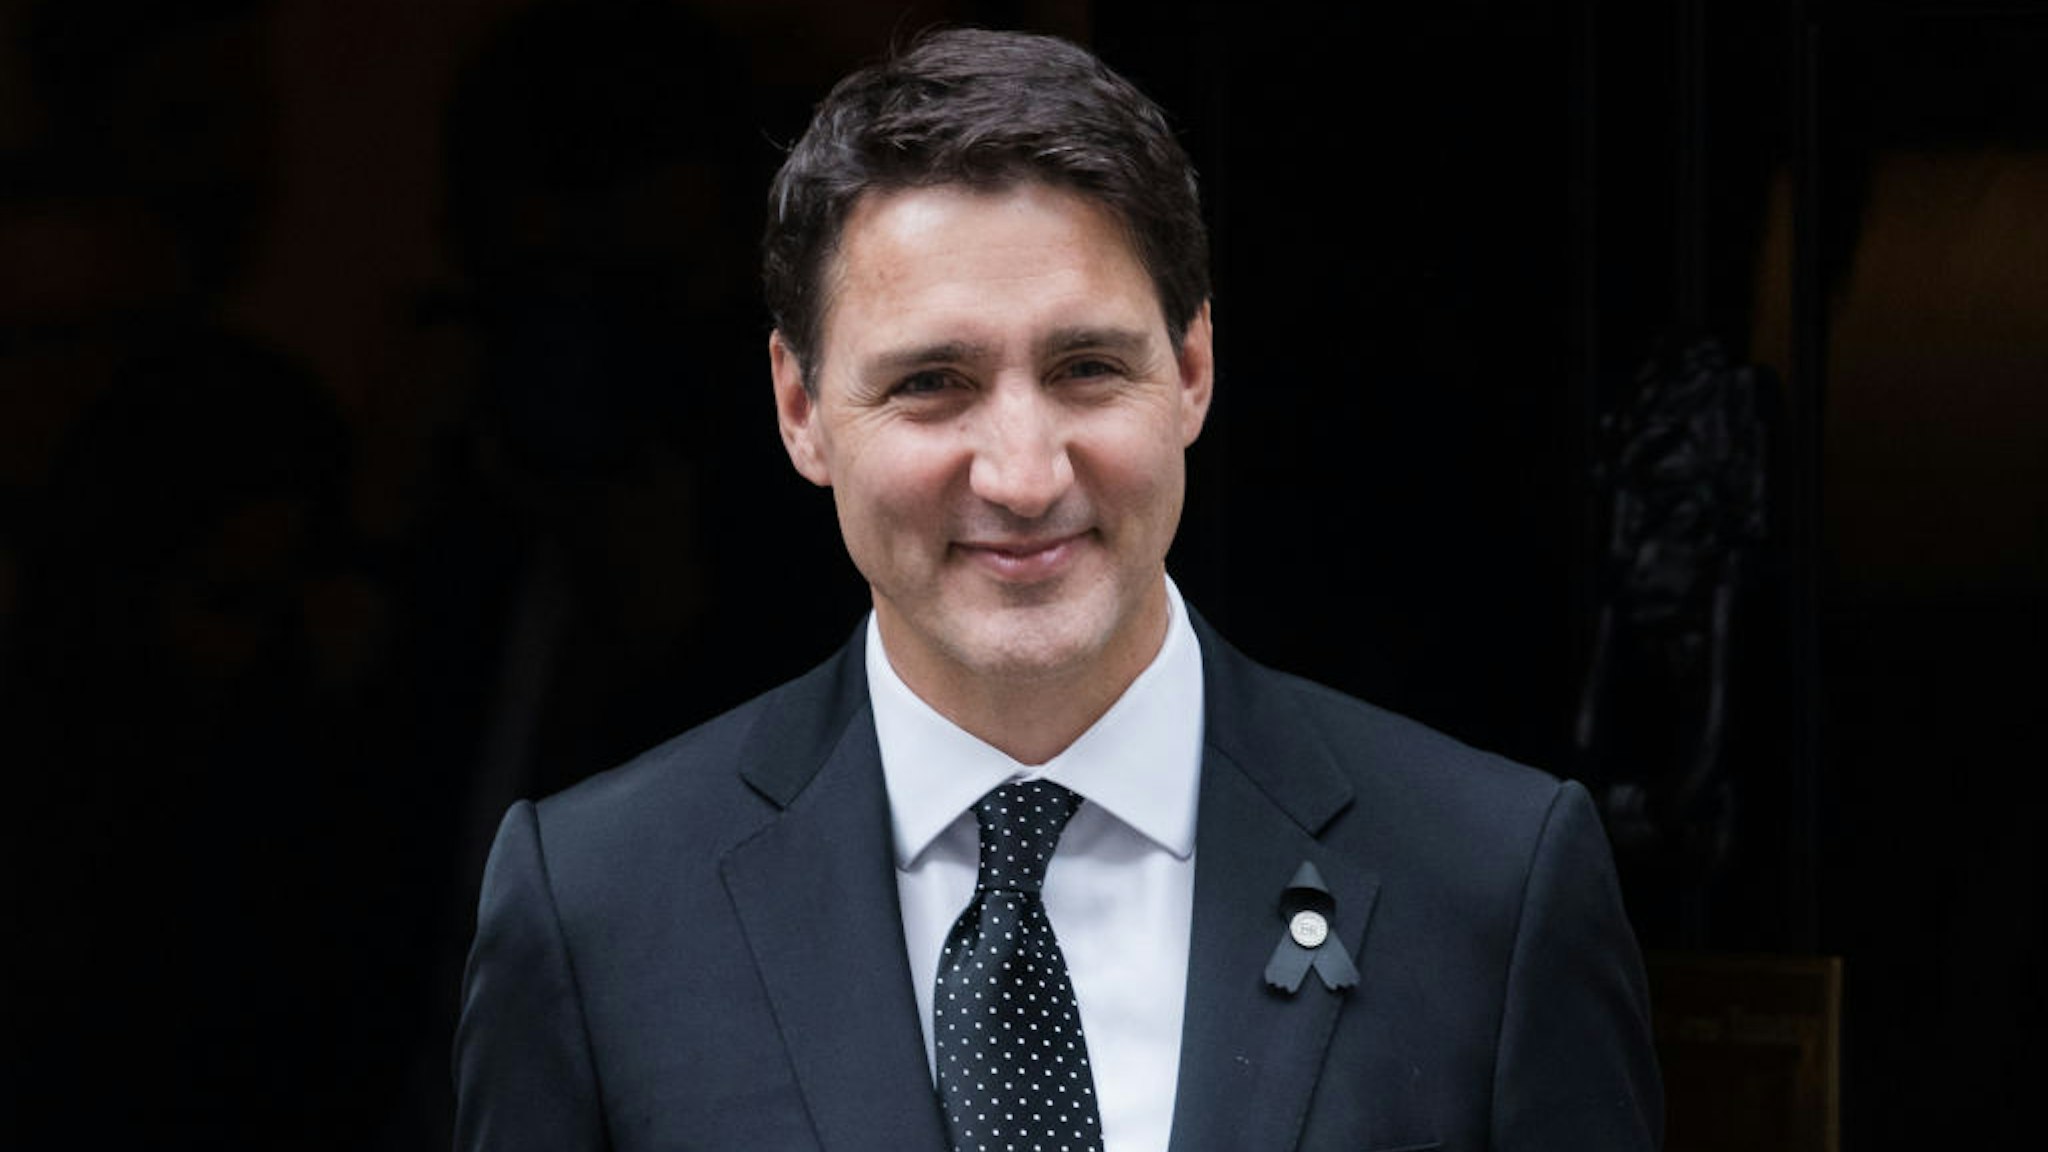 LONDON, UNITED KINGDOM - SEPTEMBER 18: Canadian Prime Minister Justin Trudeau leaves 10 Downing Street after a meeting with British Prime Minister Liz Truss ahead of the funeral of Queen Elizabeth II in London, United Kingdom on September 18, 2022. (Photo by Wiktor Szymanowicz/Anadolu Agency via Getty Images)